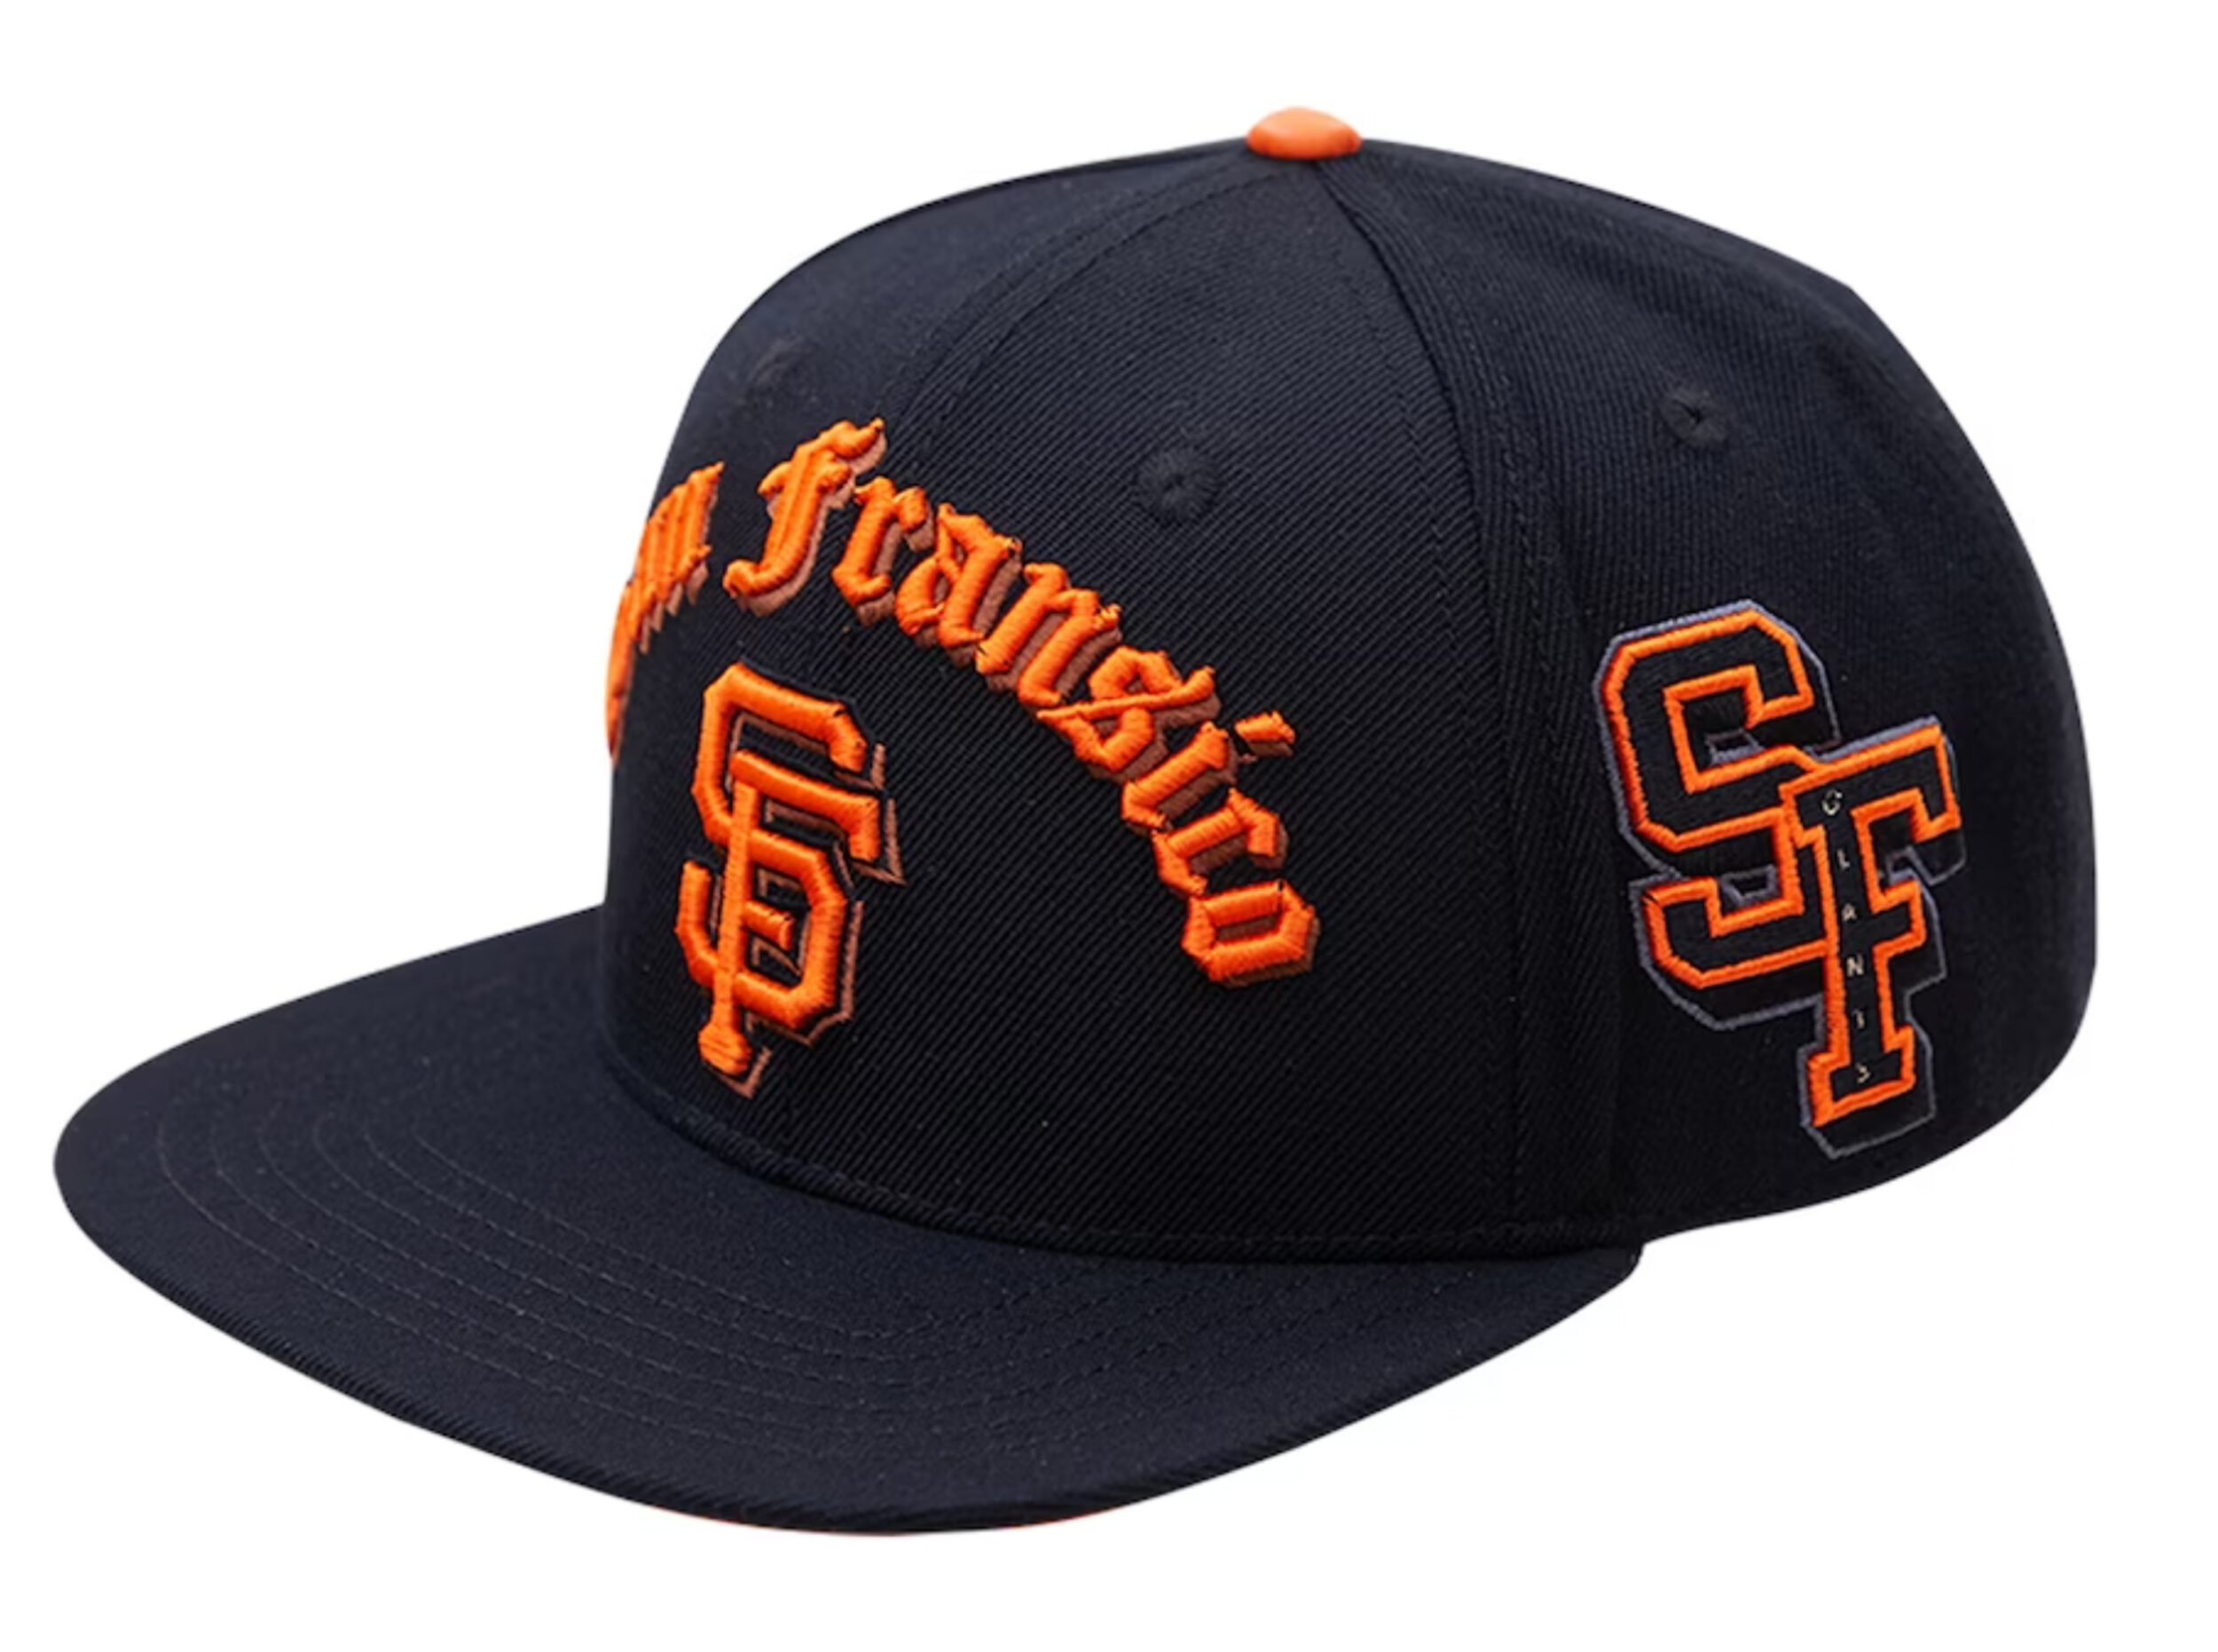 MLB Releases SF Giants Cap With Monumental Error